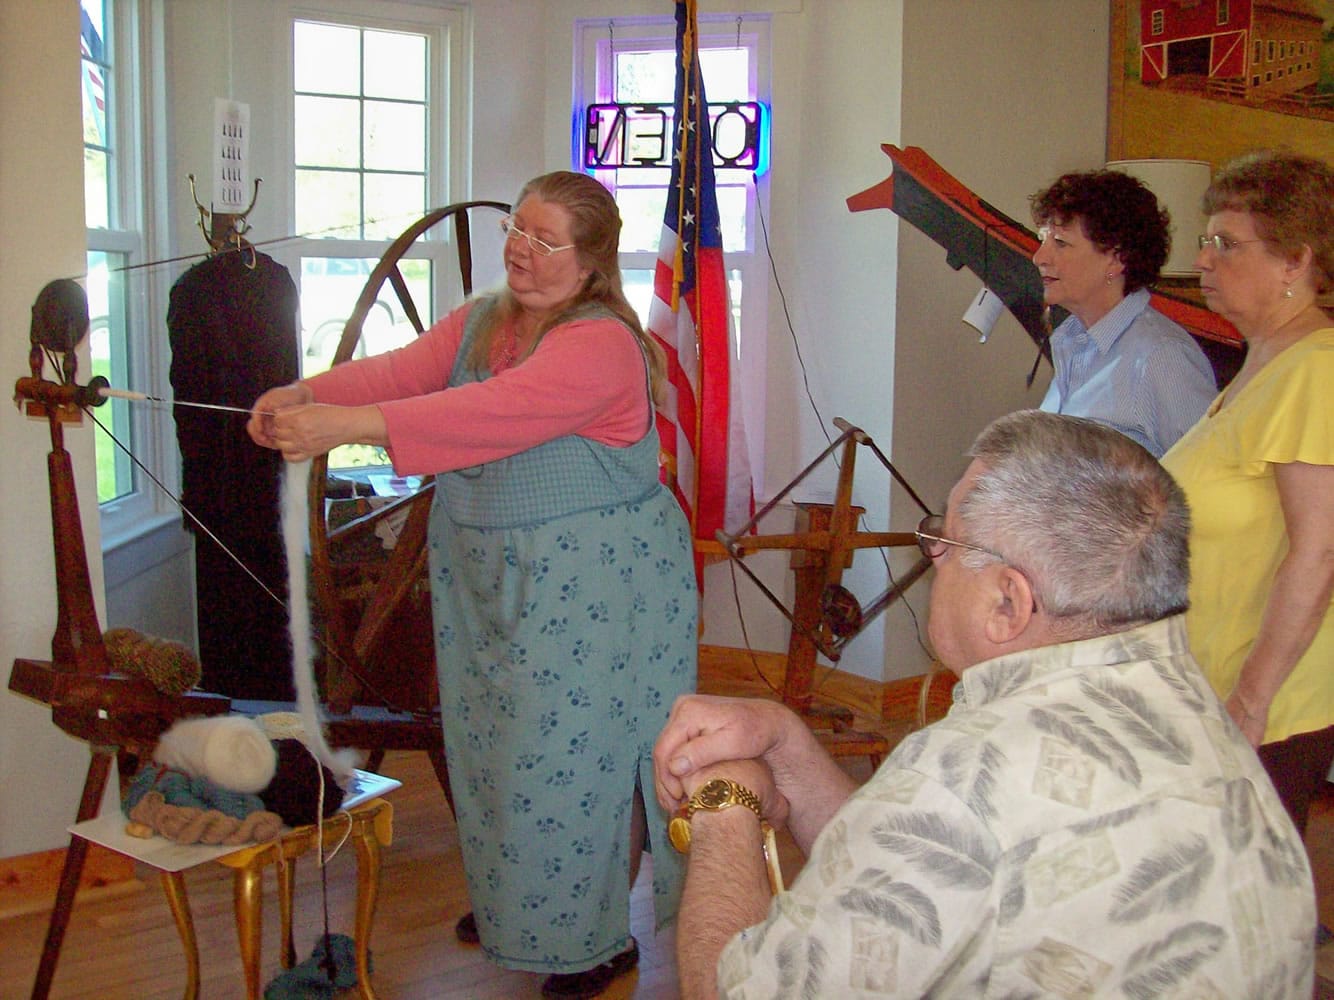 La Center: Barbara Sizemore works the historical museum's Great Spinning Wheel.